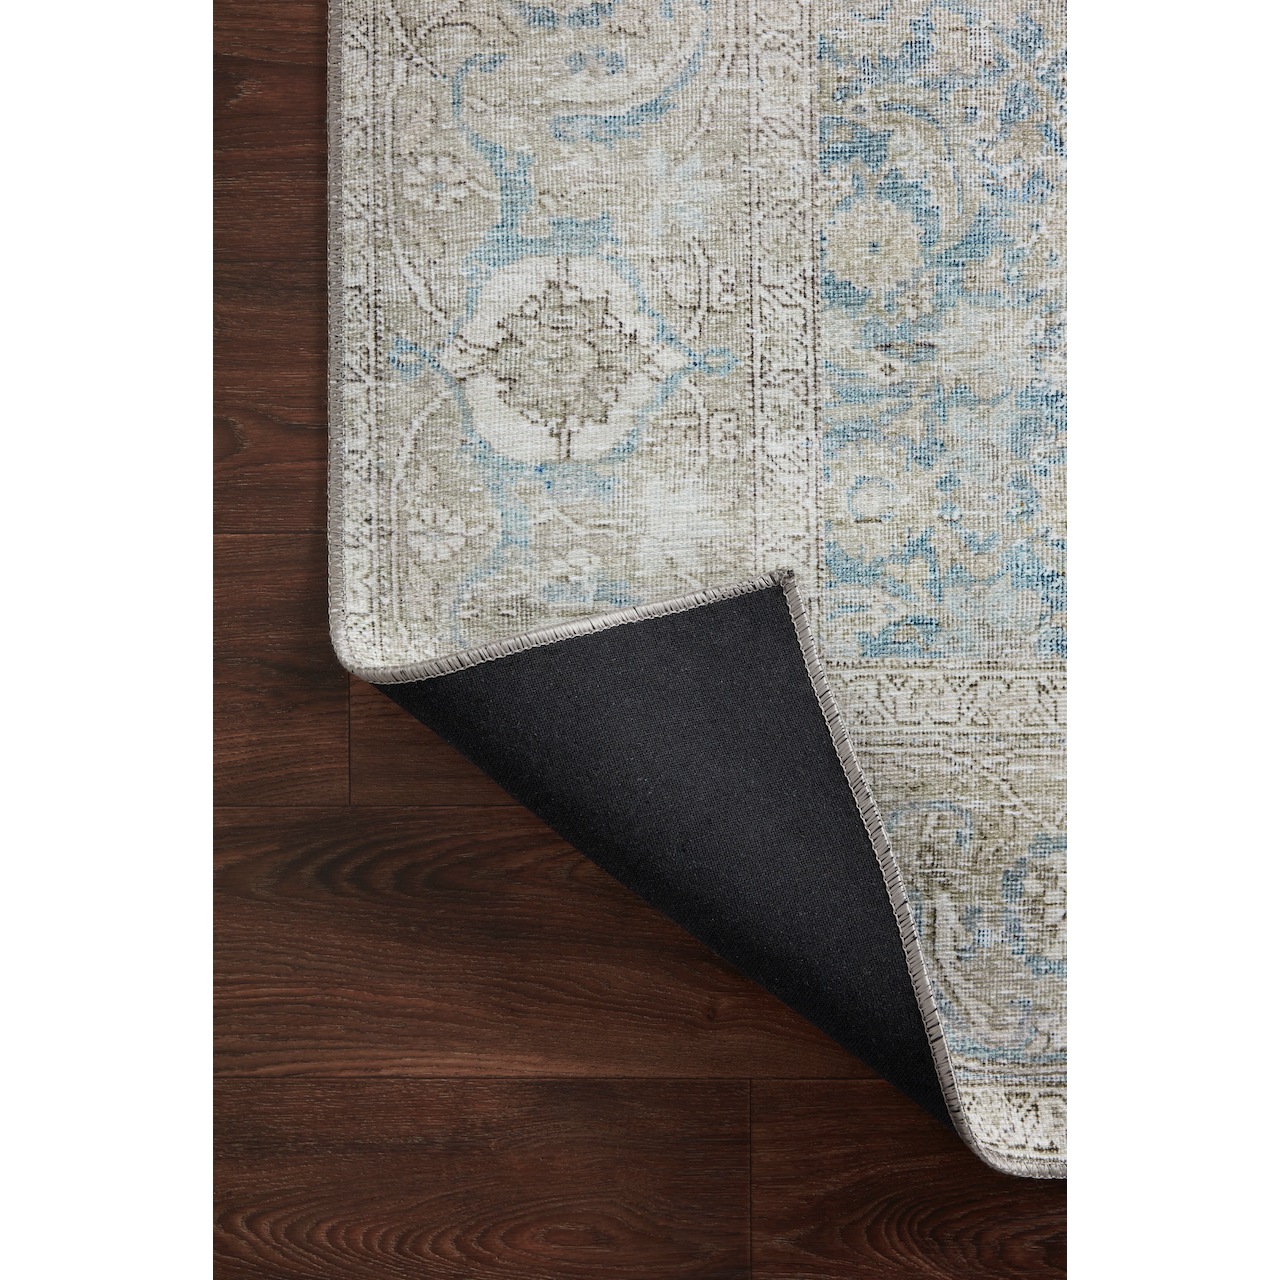 Power-loomed of 100% polyester, the Wynter Ocean / Silver WYN-10 area rug from Loloi showcases a one-of-a-kind vintage or antique area rug look at an affordable price. The rug is ideal for high traffic areas due to the rug's durability making it perfect for living rooms, dining rooms, kitchens, hallways, entryways. Amethyst Home provides interior design, new construction, custom furniture, and rugs for the Salt Lake City and Park Place, Utah metro area.